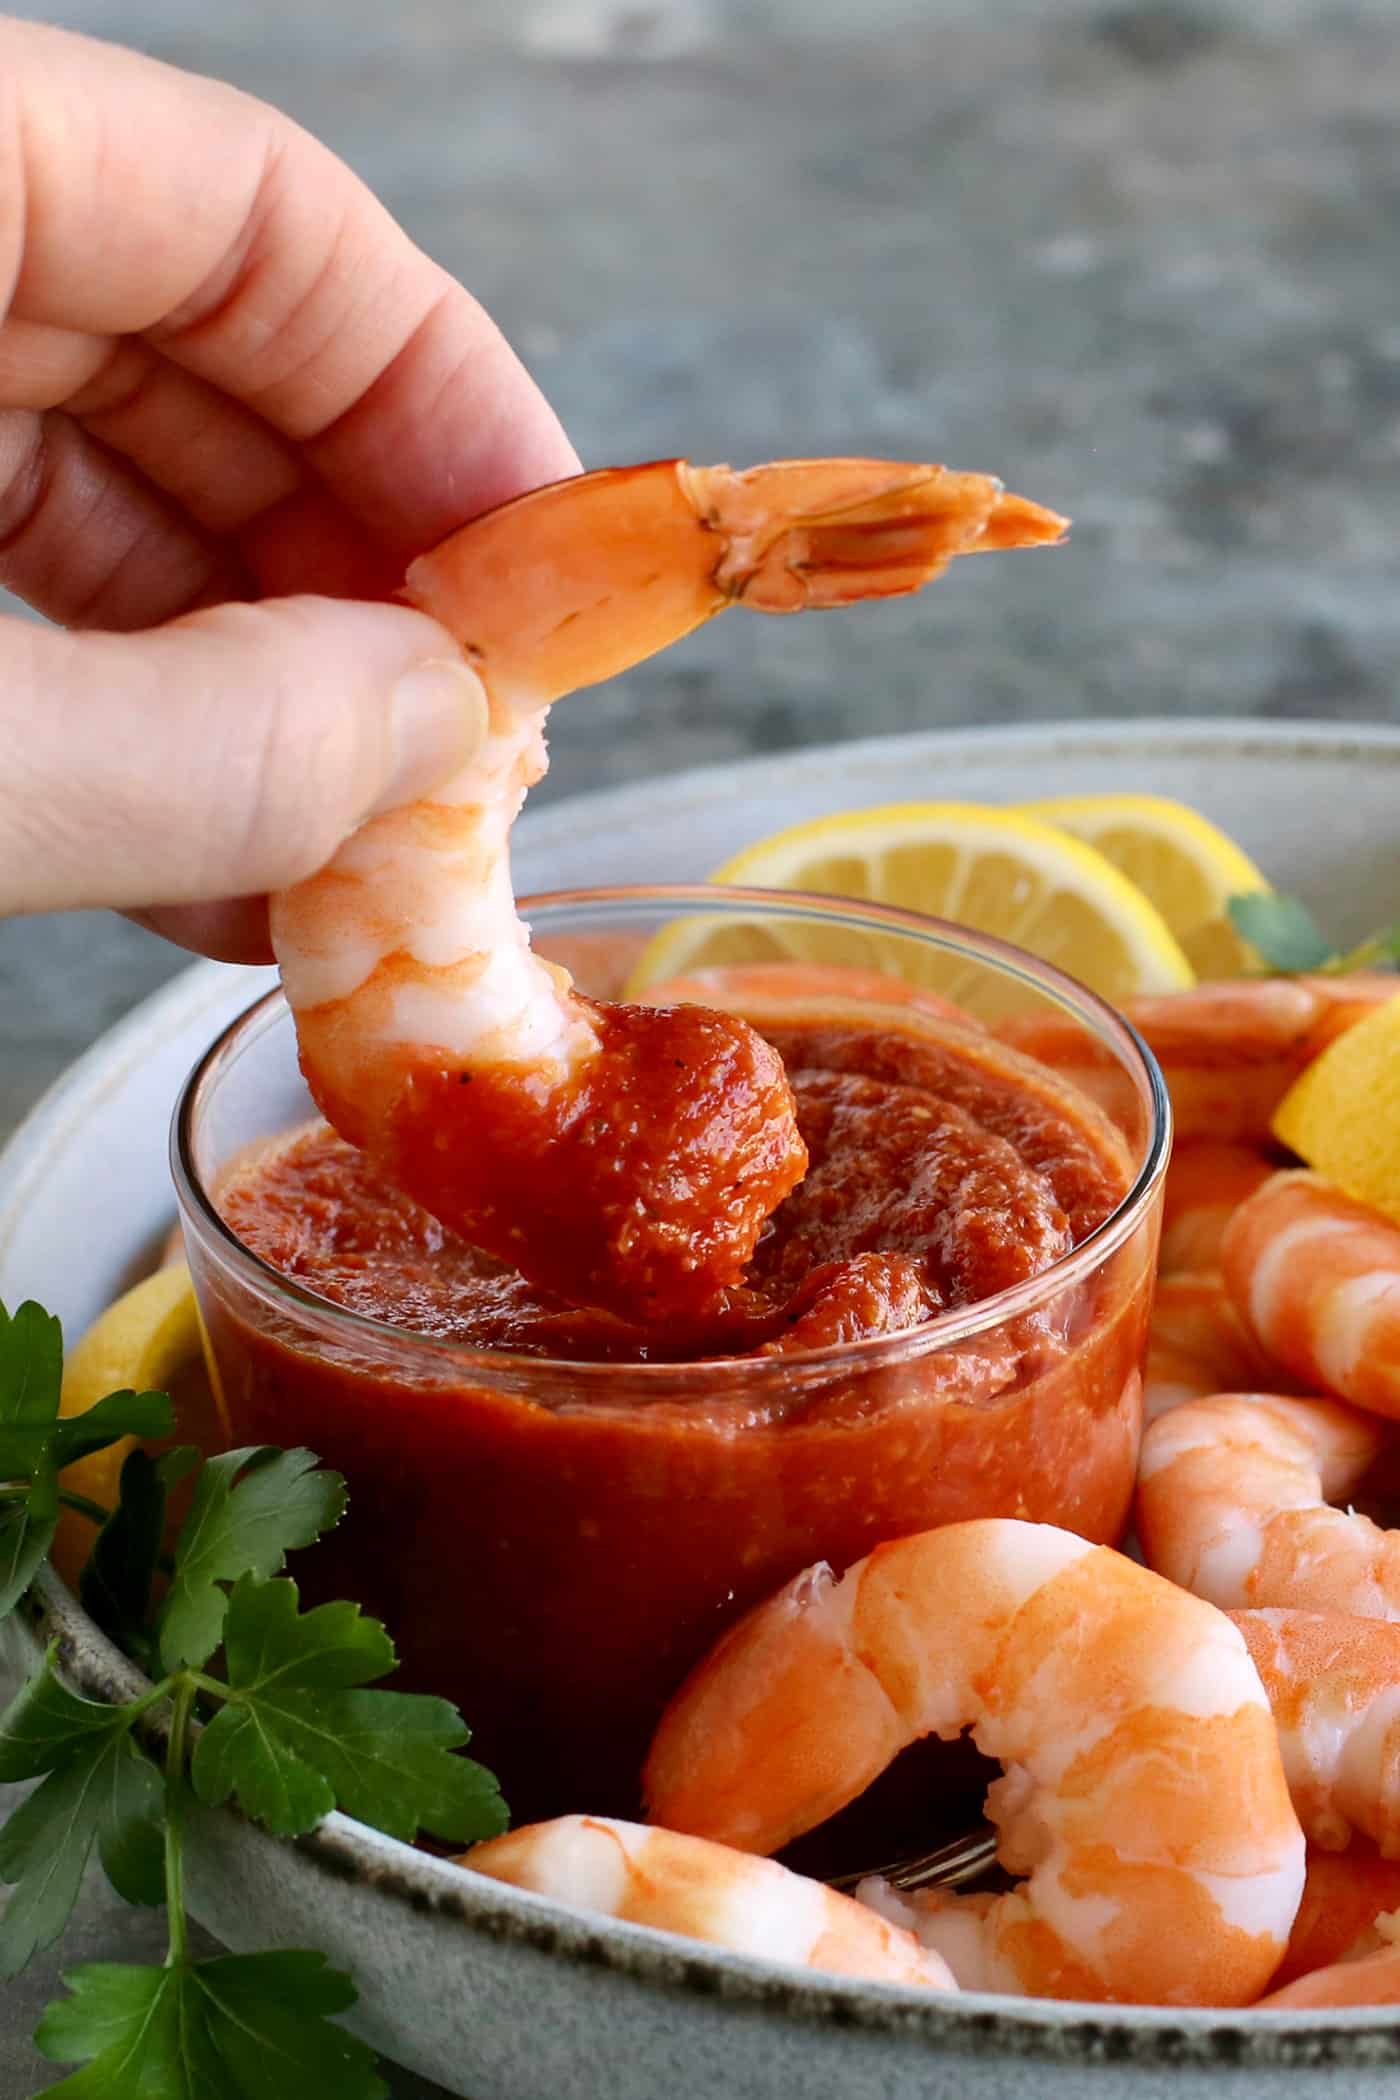 A hand dipping shrimp into a dish of cocktail sauce